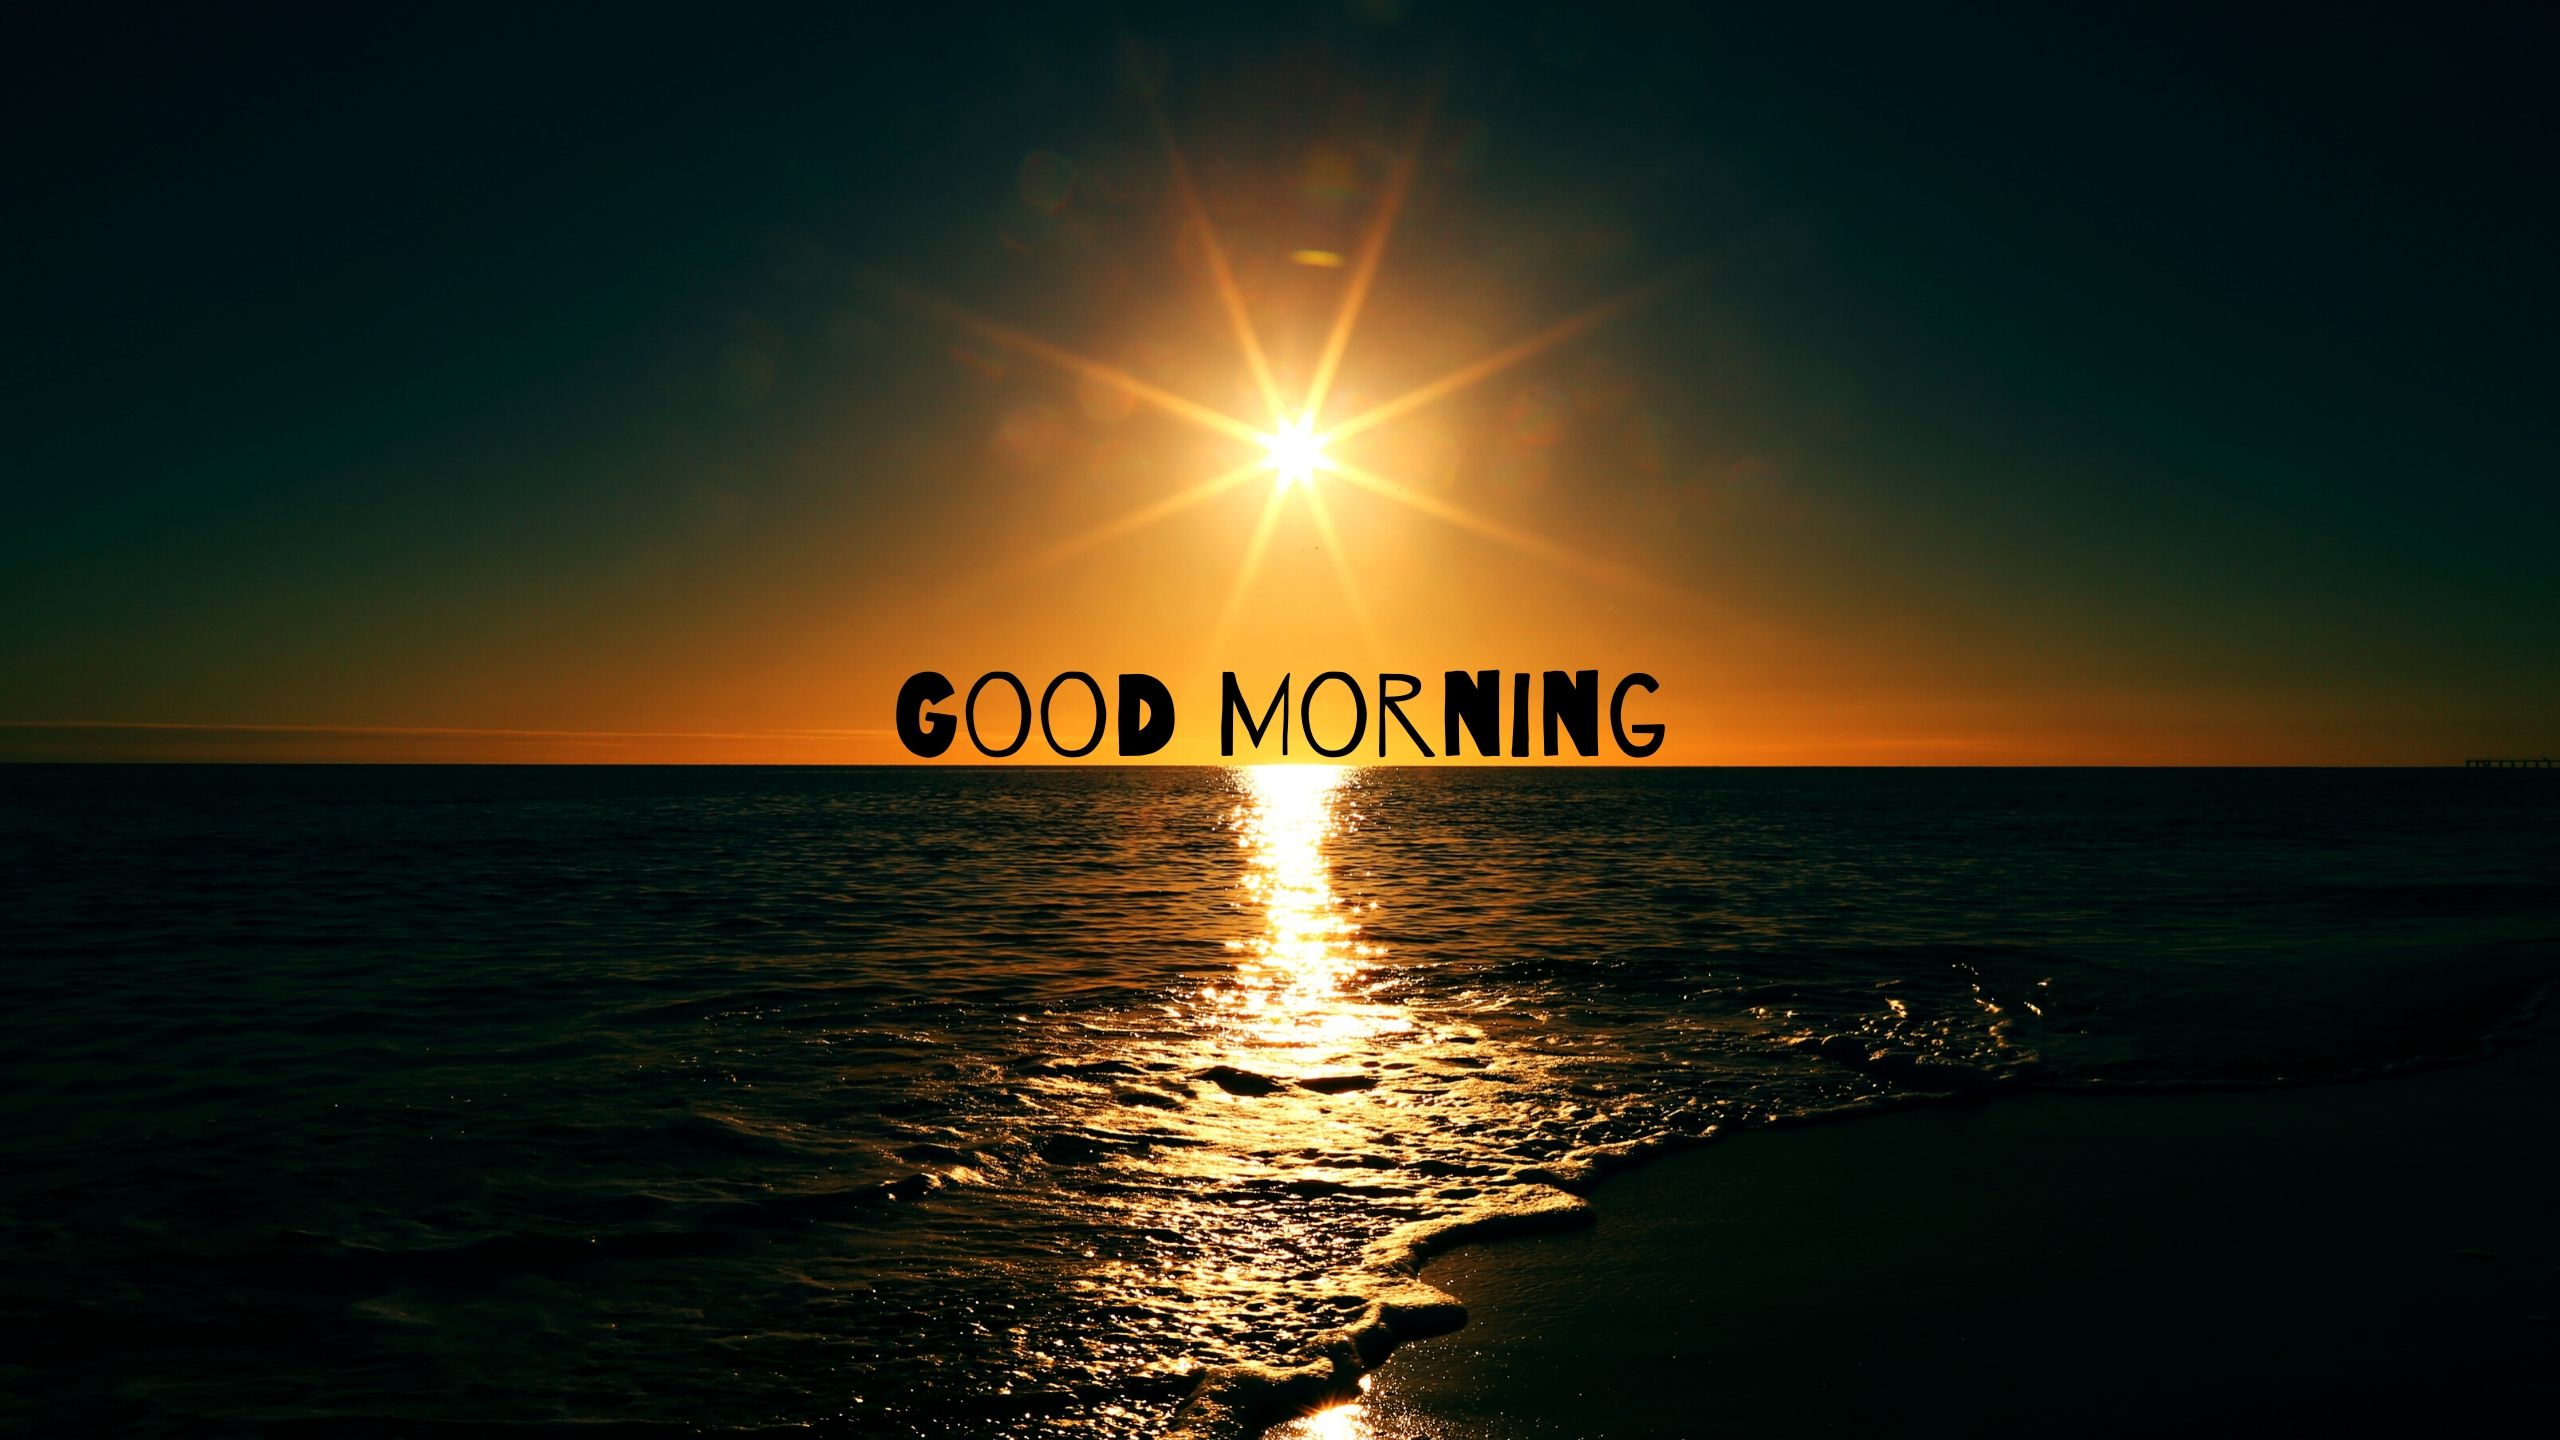 Good Morning Picture of Sun Rising Sea Side full HD free download.